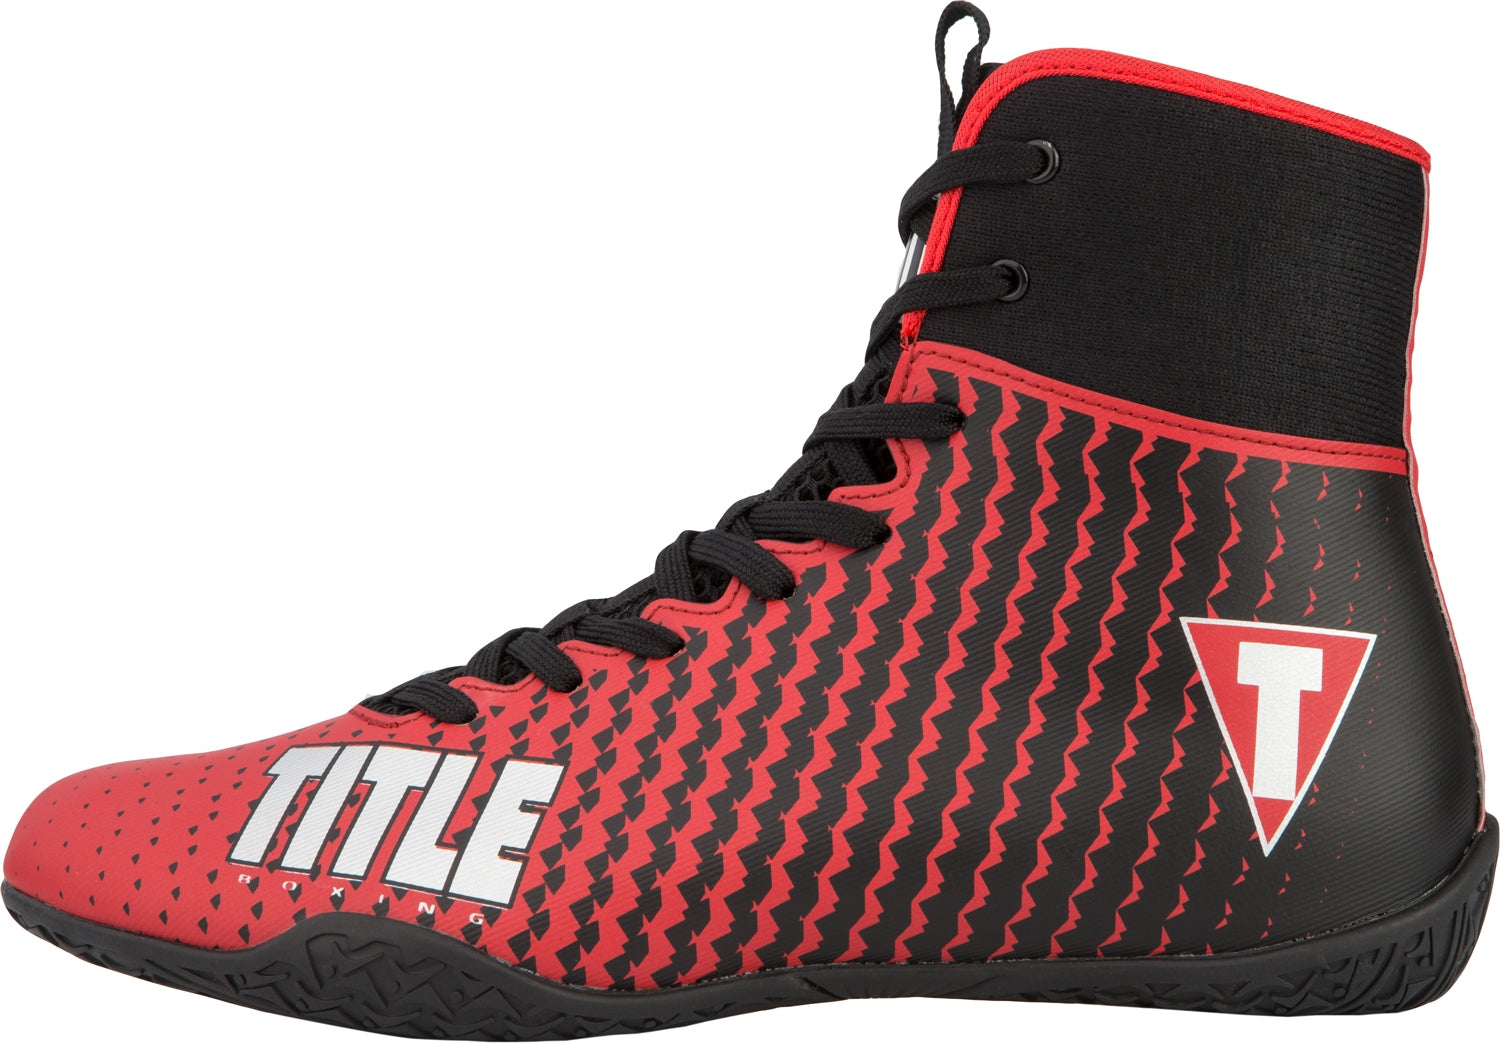 TITLE Innovate Mid Boxing Shoes | TITLE 